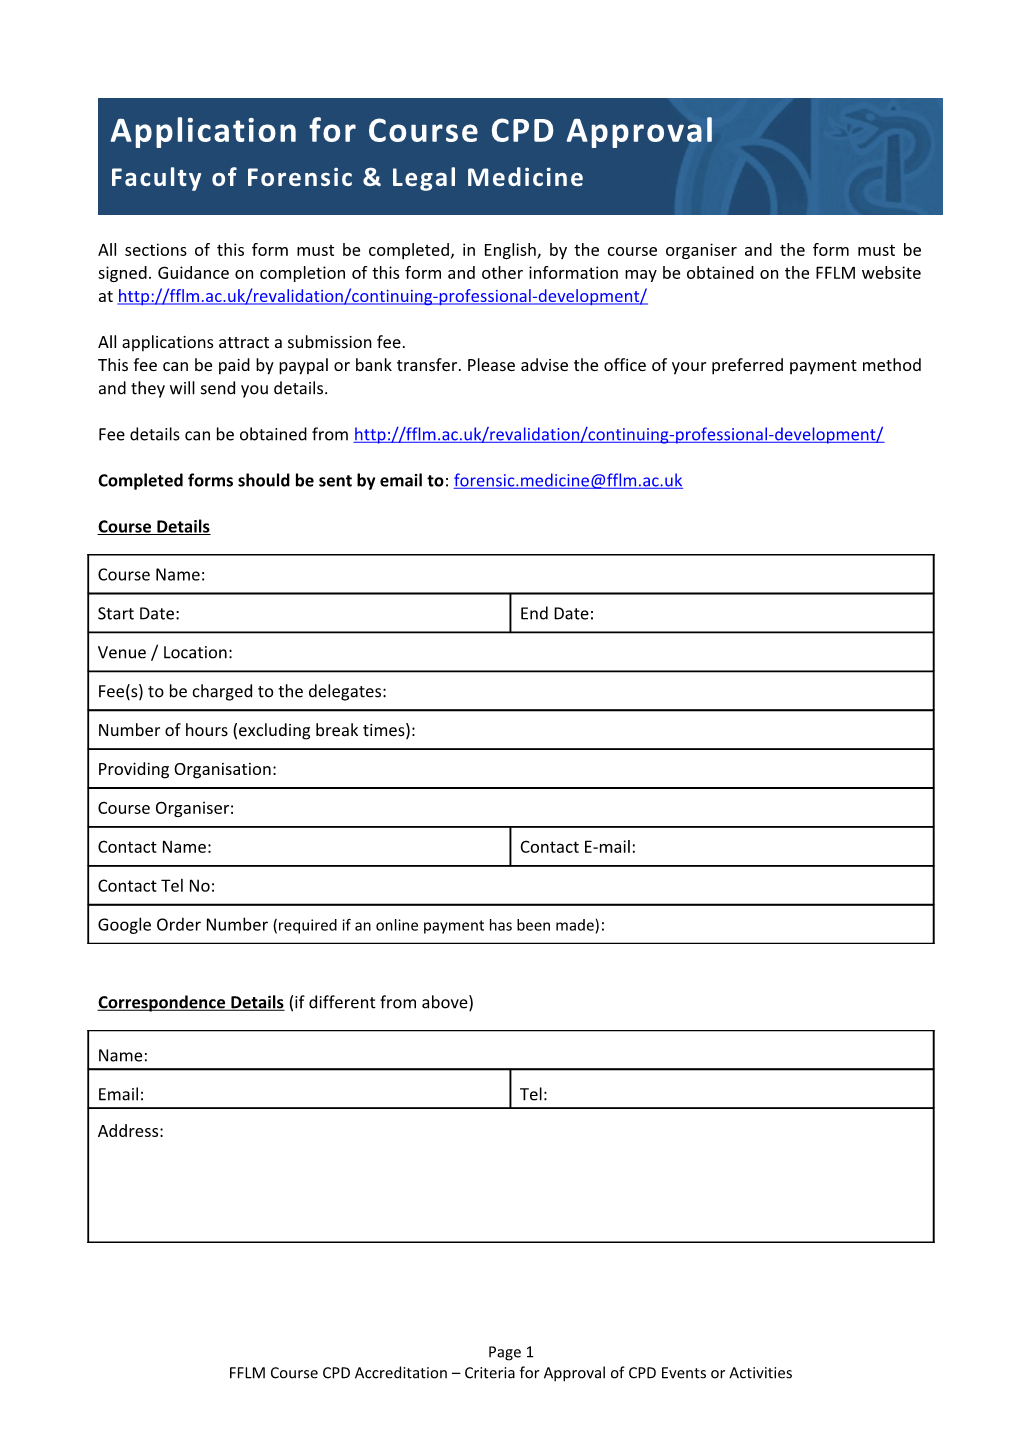 Application Form for Course Cpd Approval from the Faculty of Forensic and Legal Medicine